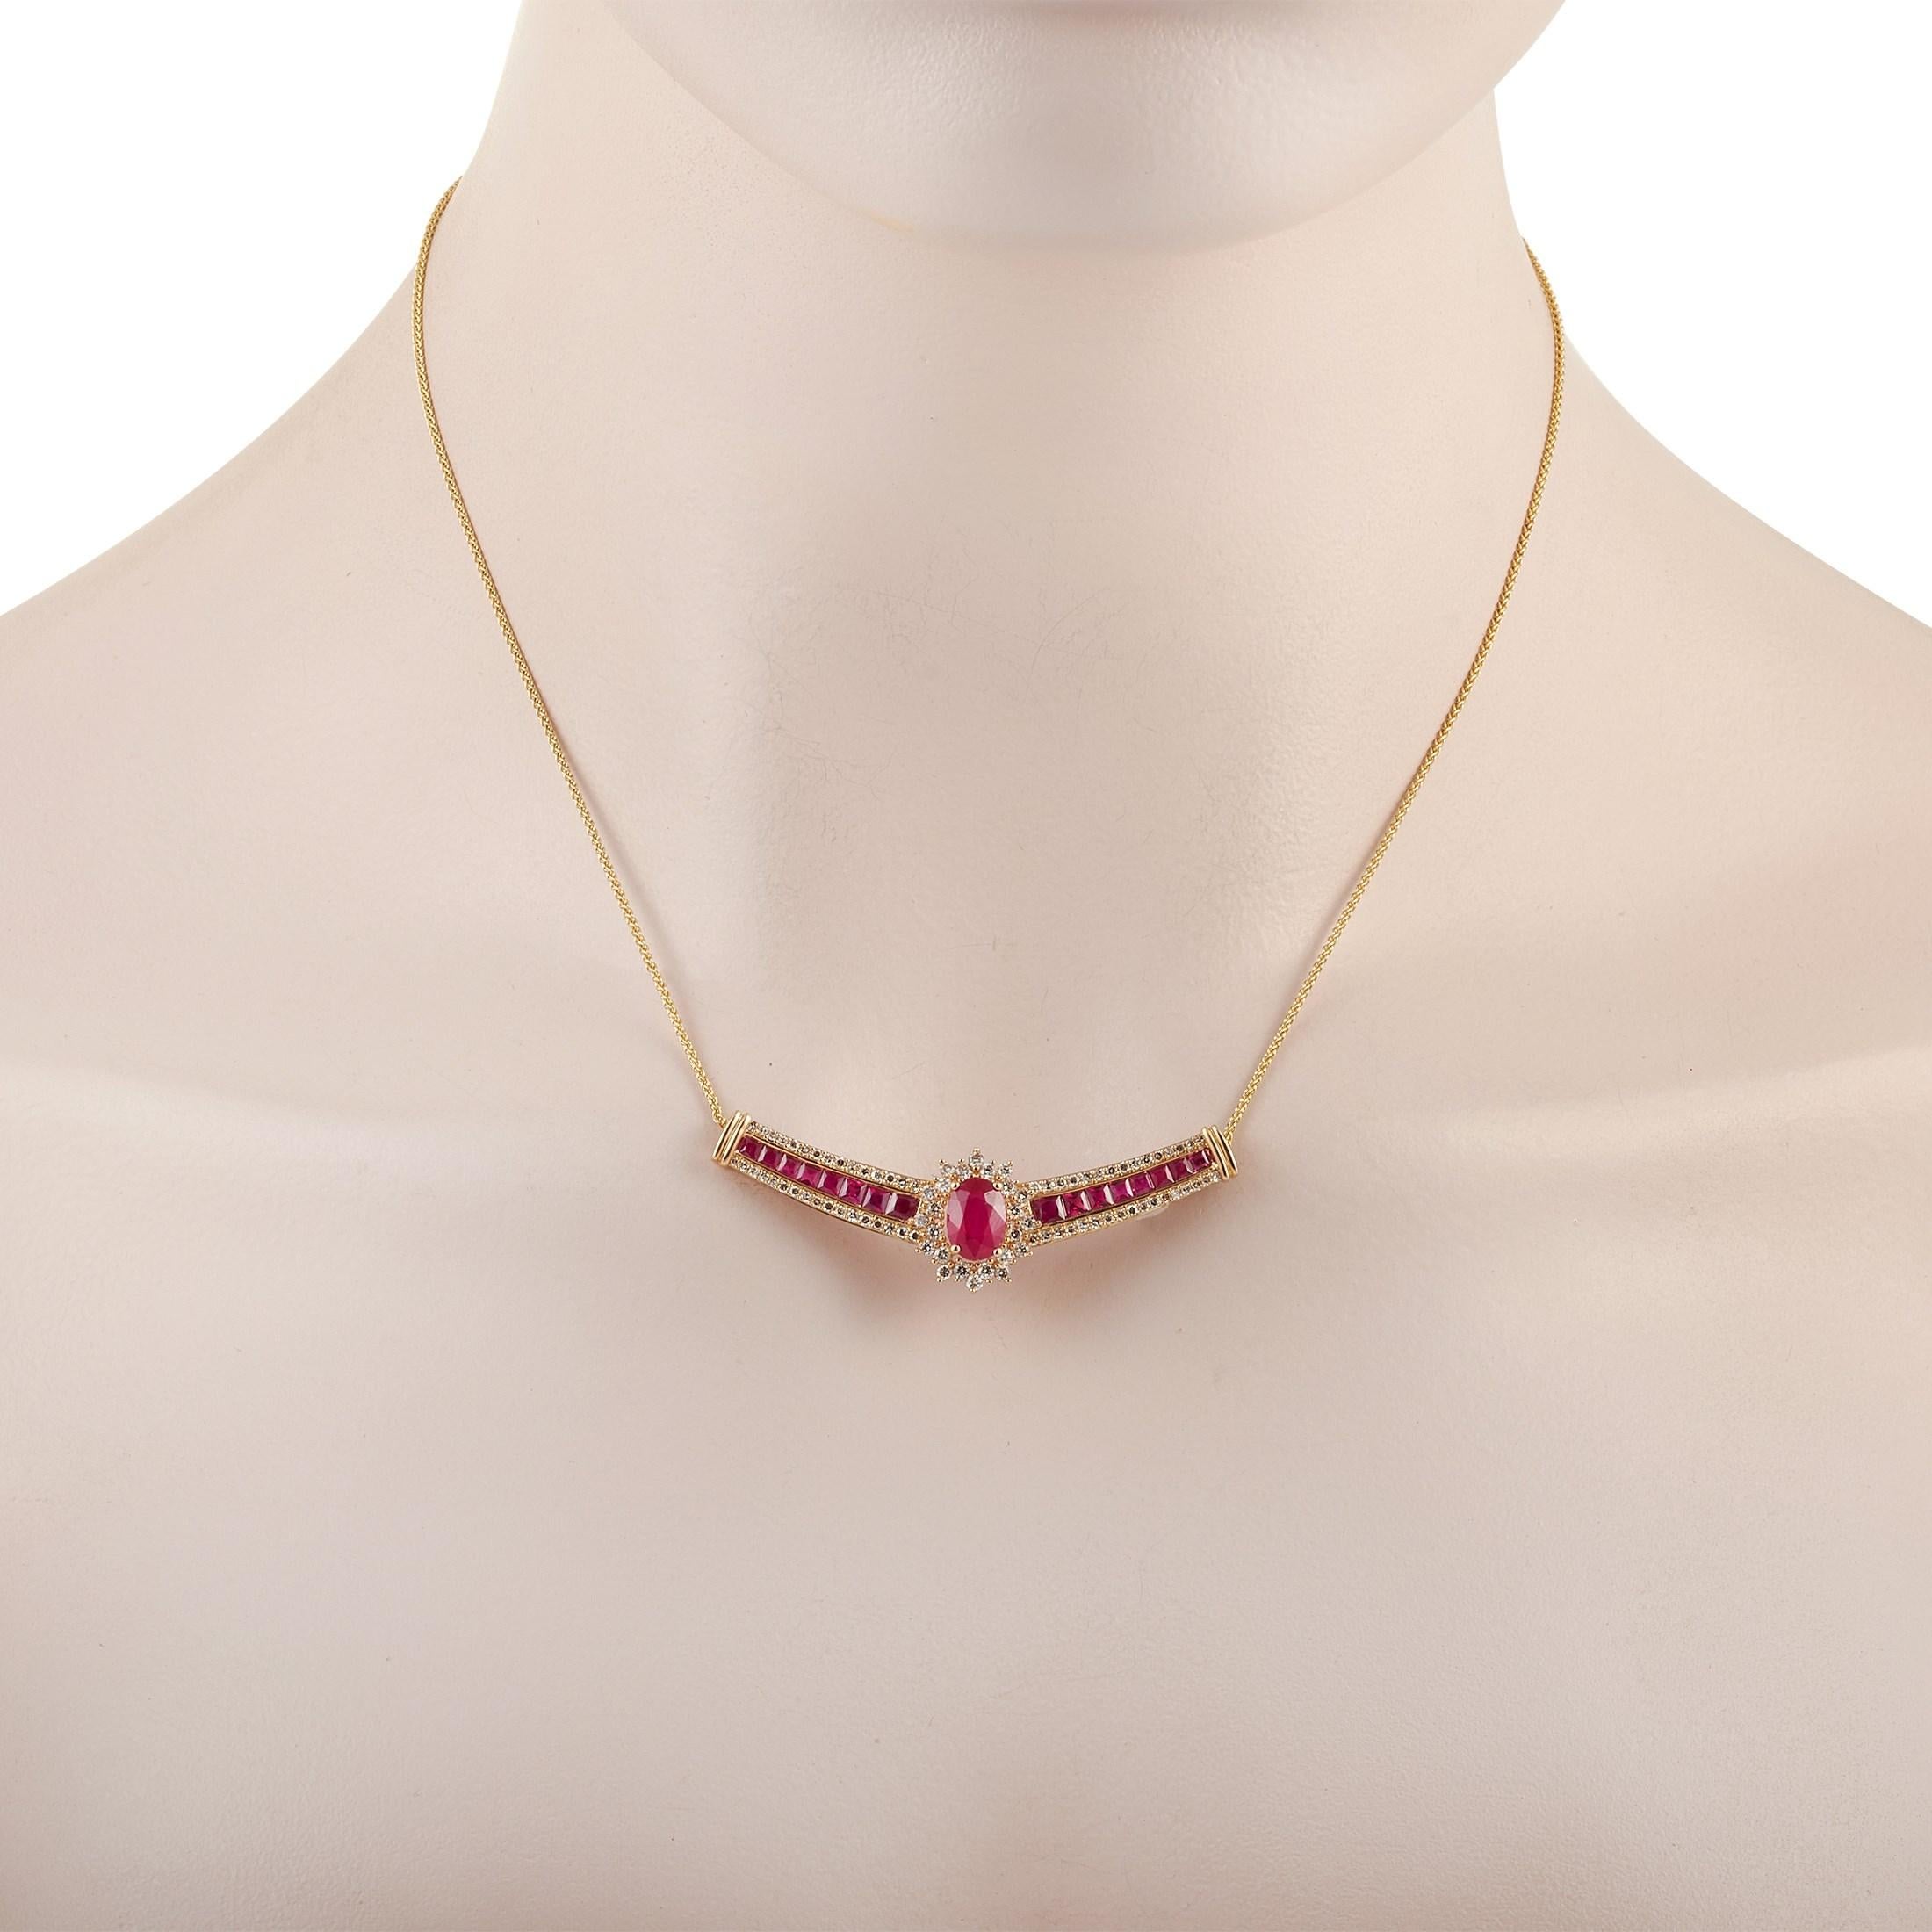 This LB Exclusive 14K Yellow Gold 0.75 ct Diamond and 3 ct Ruby Necklace features a delicate 14K Yellow Gold chain measuring 15 inches in length. The necklace features a matching 14K Yellow Gold Bar style Pendant set with 0.75 carats of round-cut